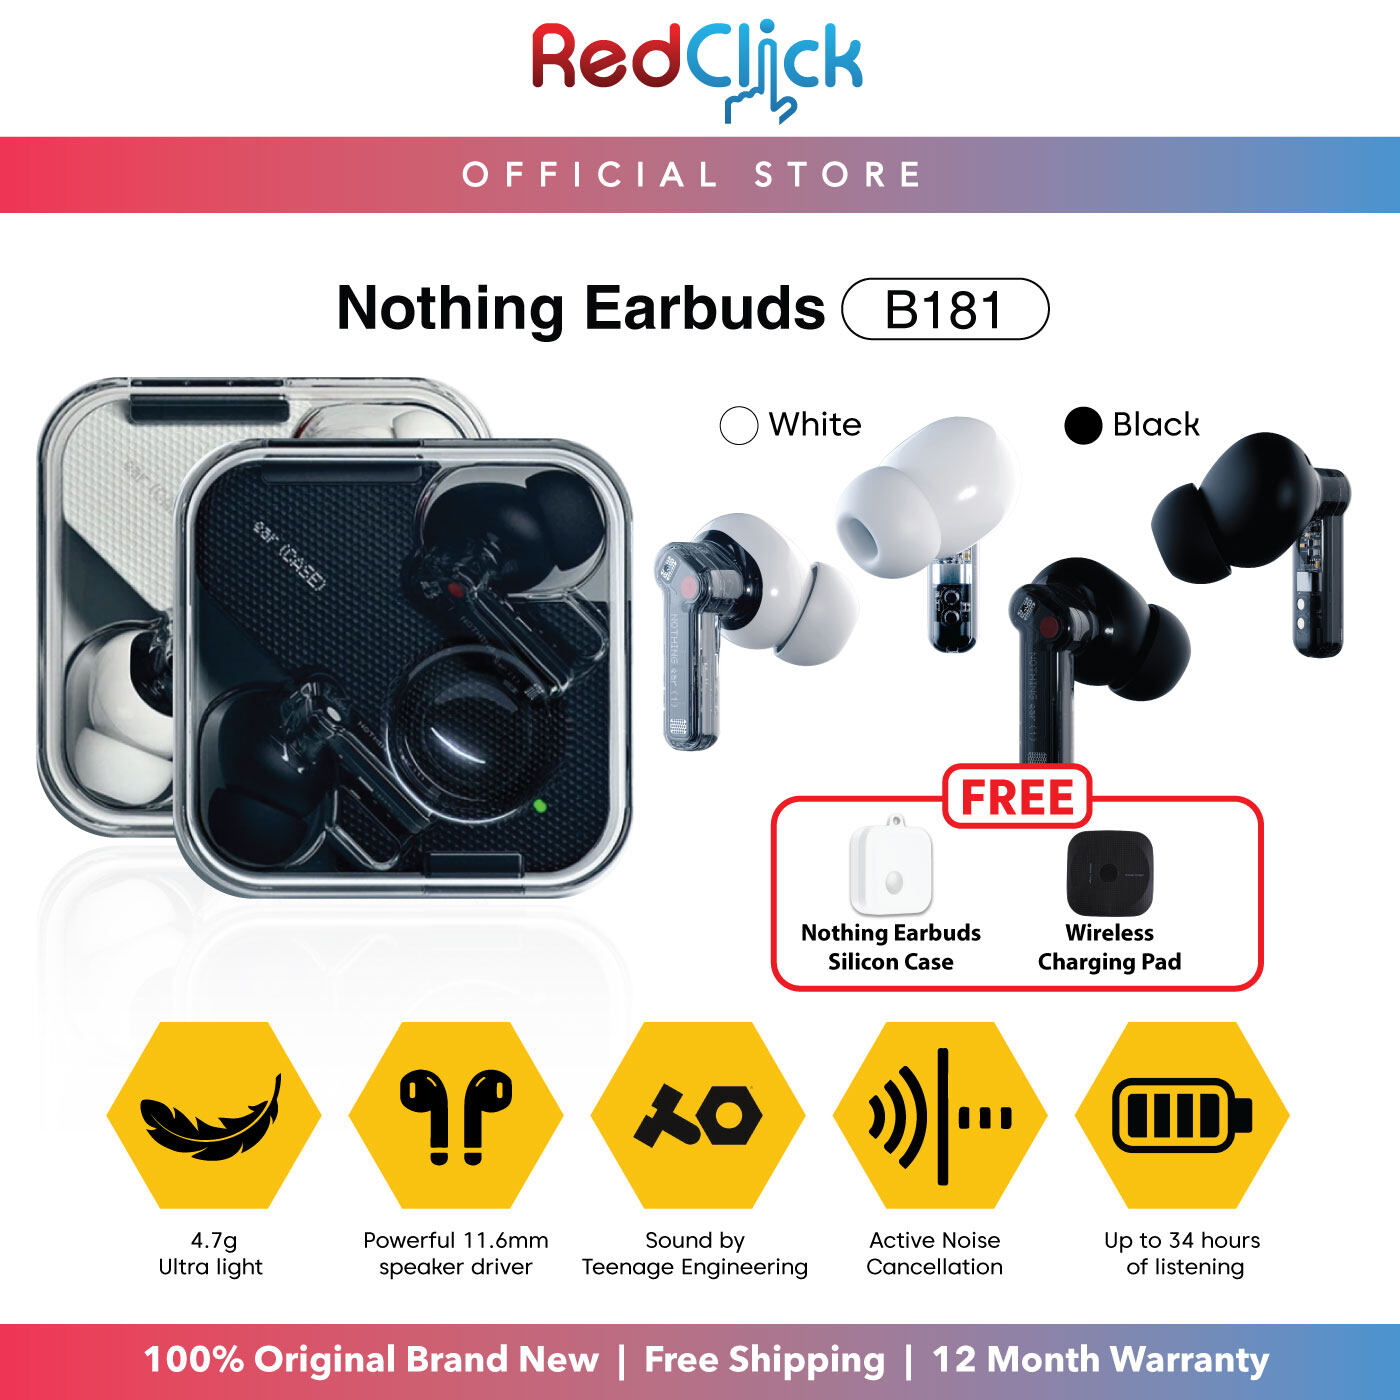 Nothing Earbuds B181 TWS Wireless Earbuds Bluetooth 5.2 Ultra Light-Weight Powerful Speaker Driver Support Active Noise Cancellation Long Battery Life + Free Gift